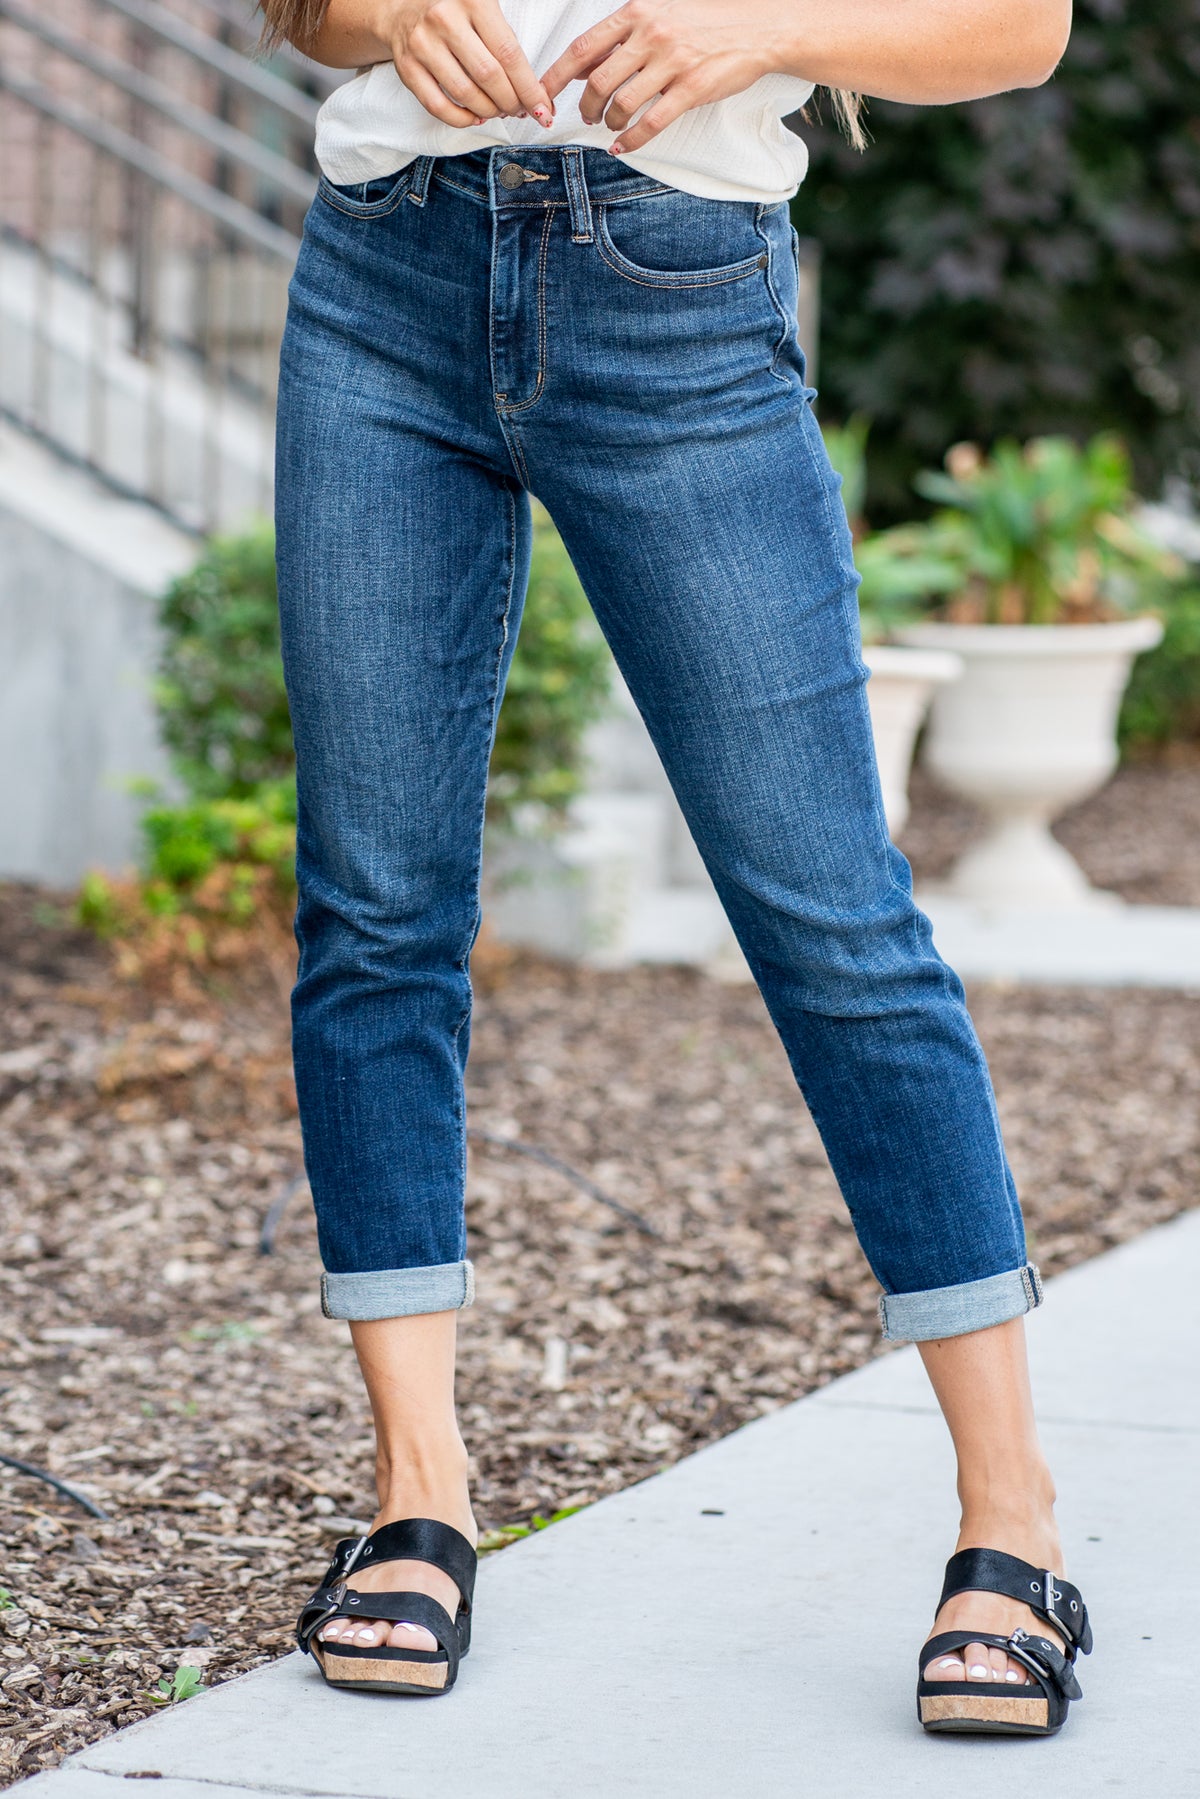 Judy Blue   These are the jeans everyone wants! A tuck you in a high rise with a  cuffed slim leg, these slim fits will be your new go-to denim.  Color: Dark Blue Wash Cut: Boyfriend, 25" Inseam Cuffed* 27" Inseam Uncuffed* Rise: High-Rise. 10.5" Front Rise* Material: 93% COTTON, 6% POLYESTER, 1% SPANDEX Machine Wash Separately In Cold Water Stitching: Classic Fly: Zipper Style #: JB82390 | 82390